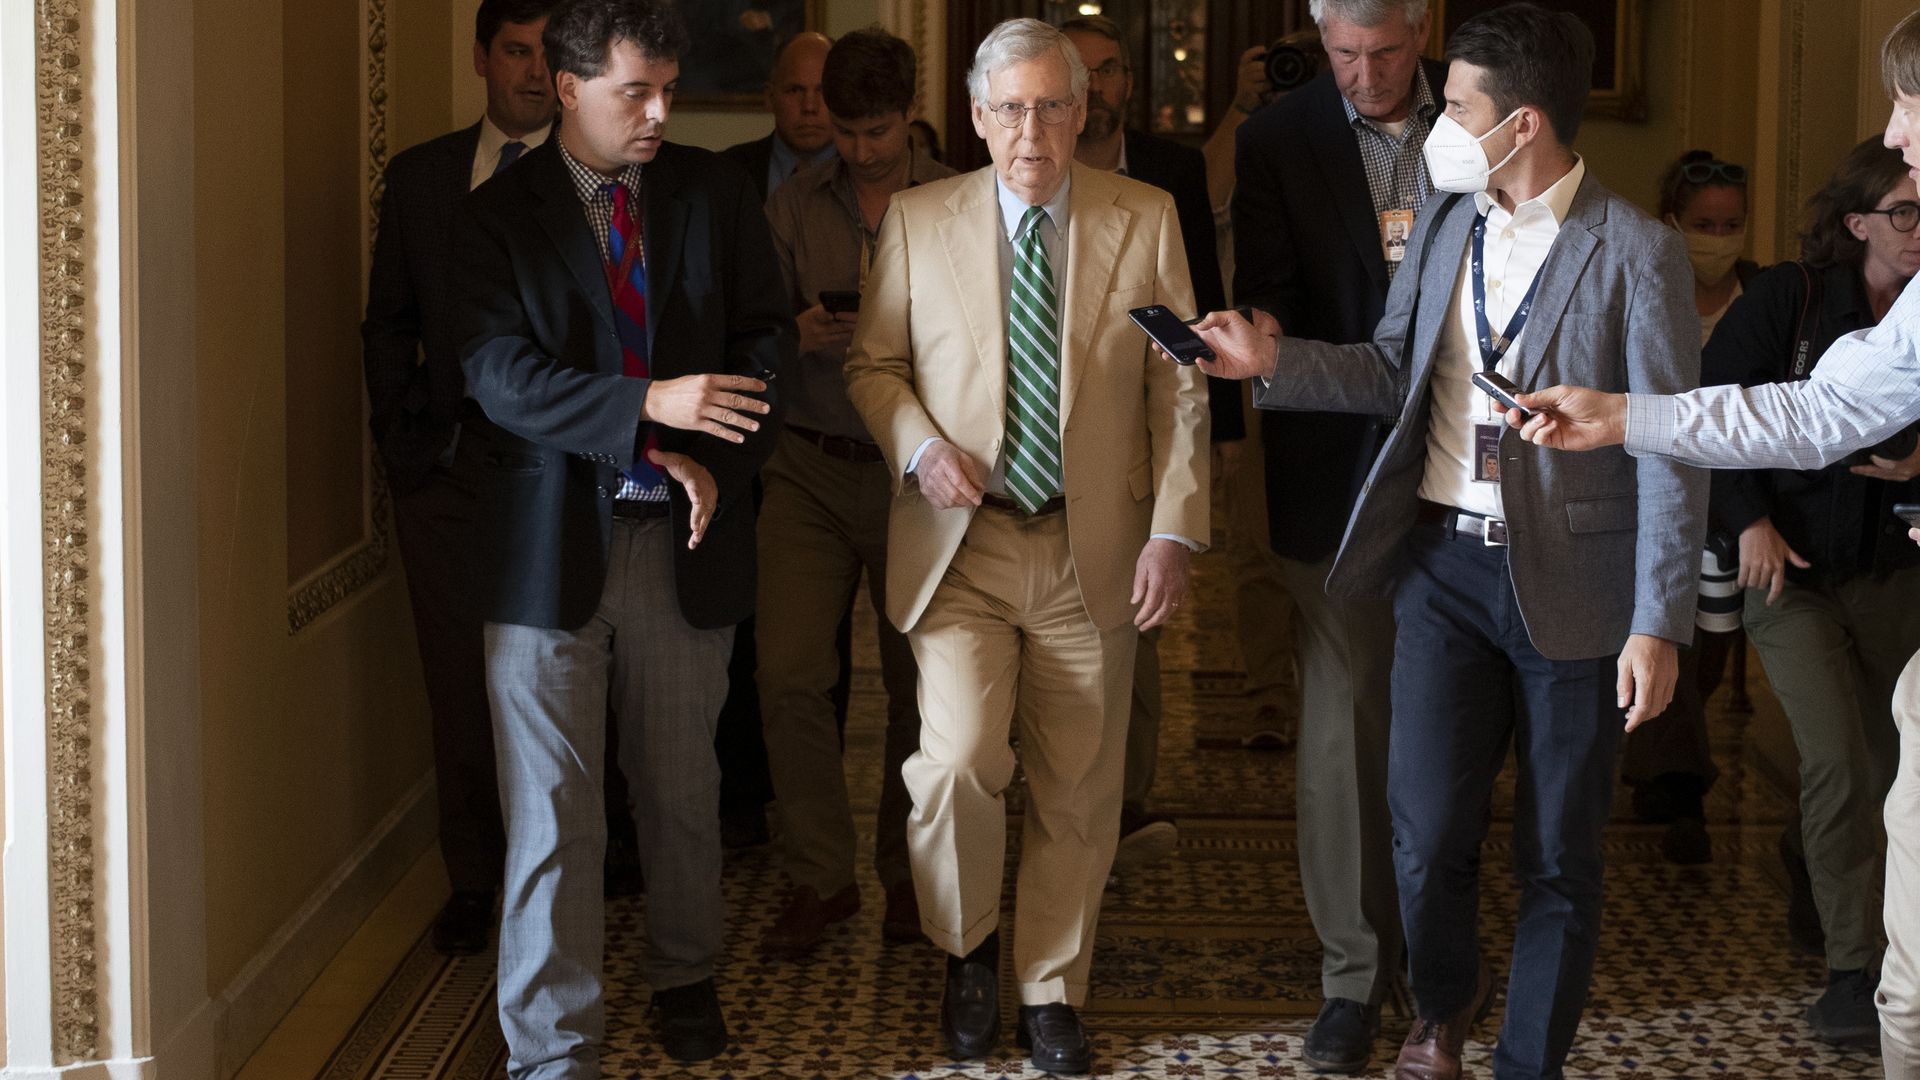 Senate Minority Leader Mitch McConnell is seen speaking with reporters as he walks through the Capitol.